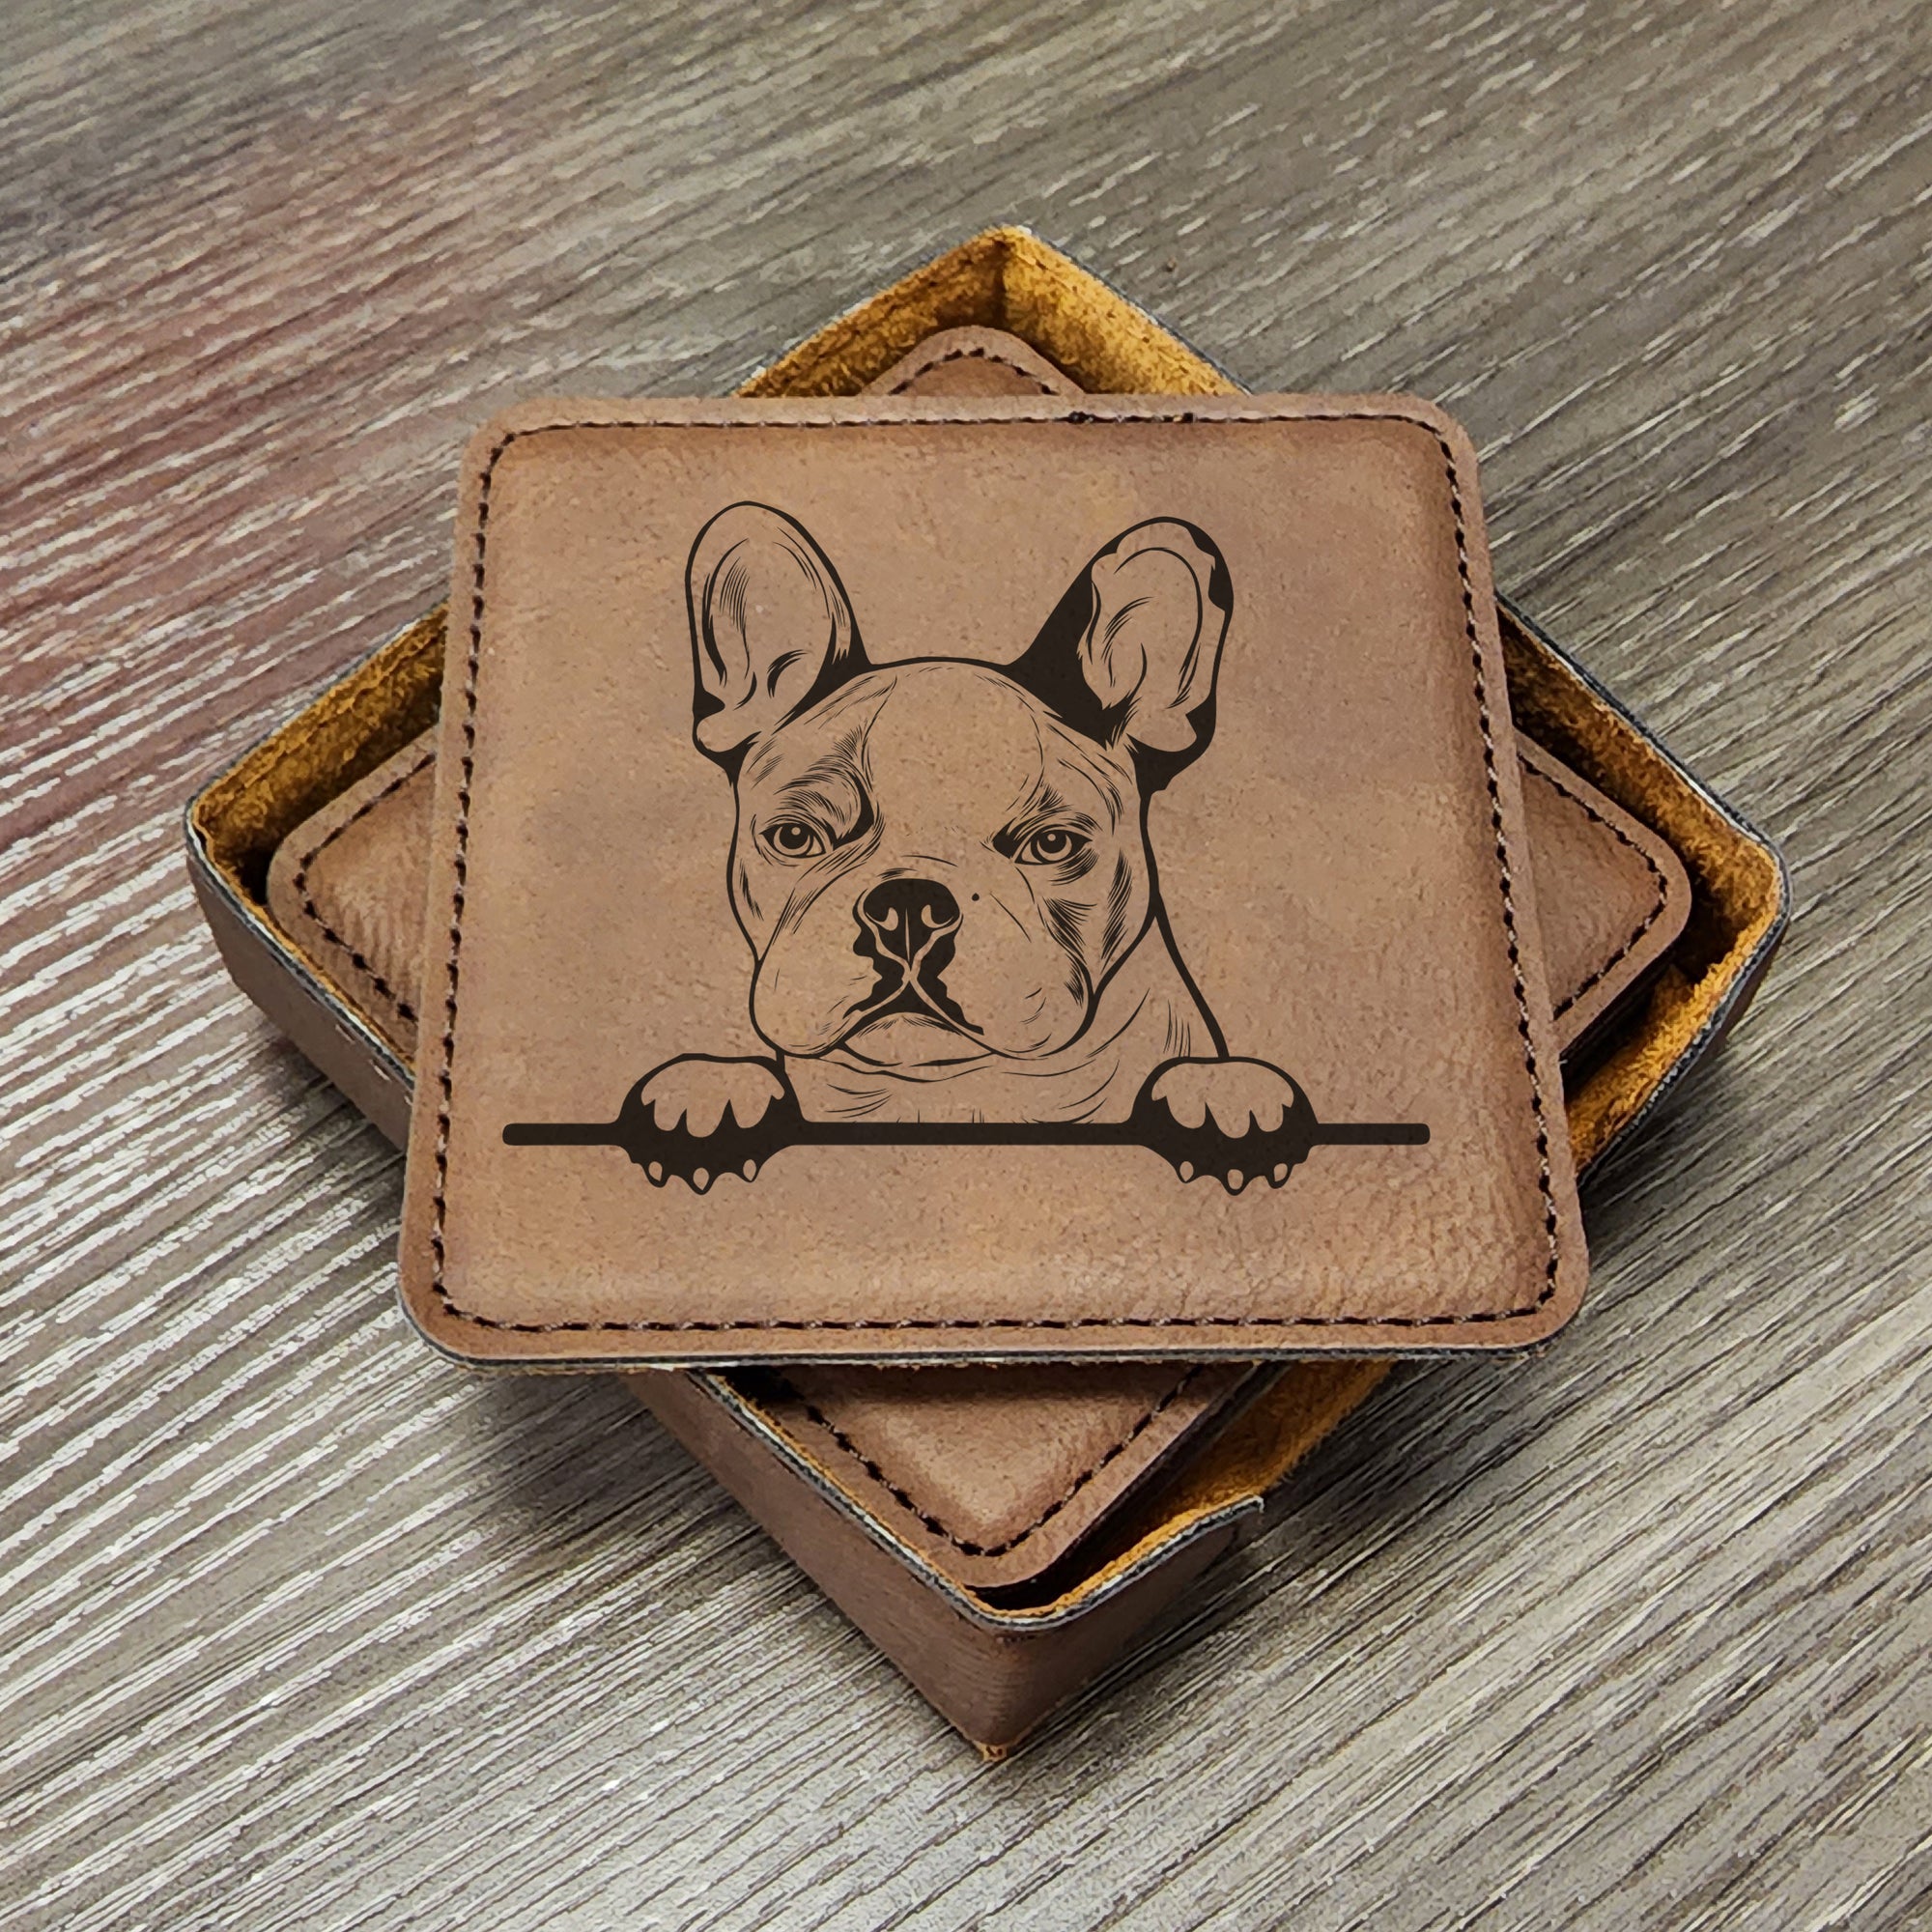 French Bulldog Coaster set, Frenchie Coasters, Dog Lover Gift, Family Room Coasters, Living Room Coaster, Cute Dog Gift Set of 6 With Holder